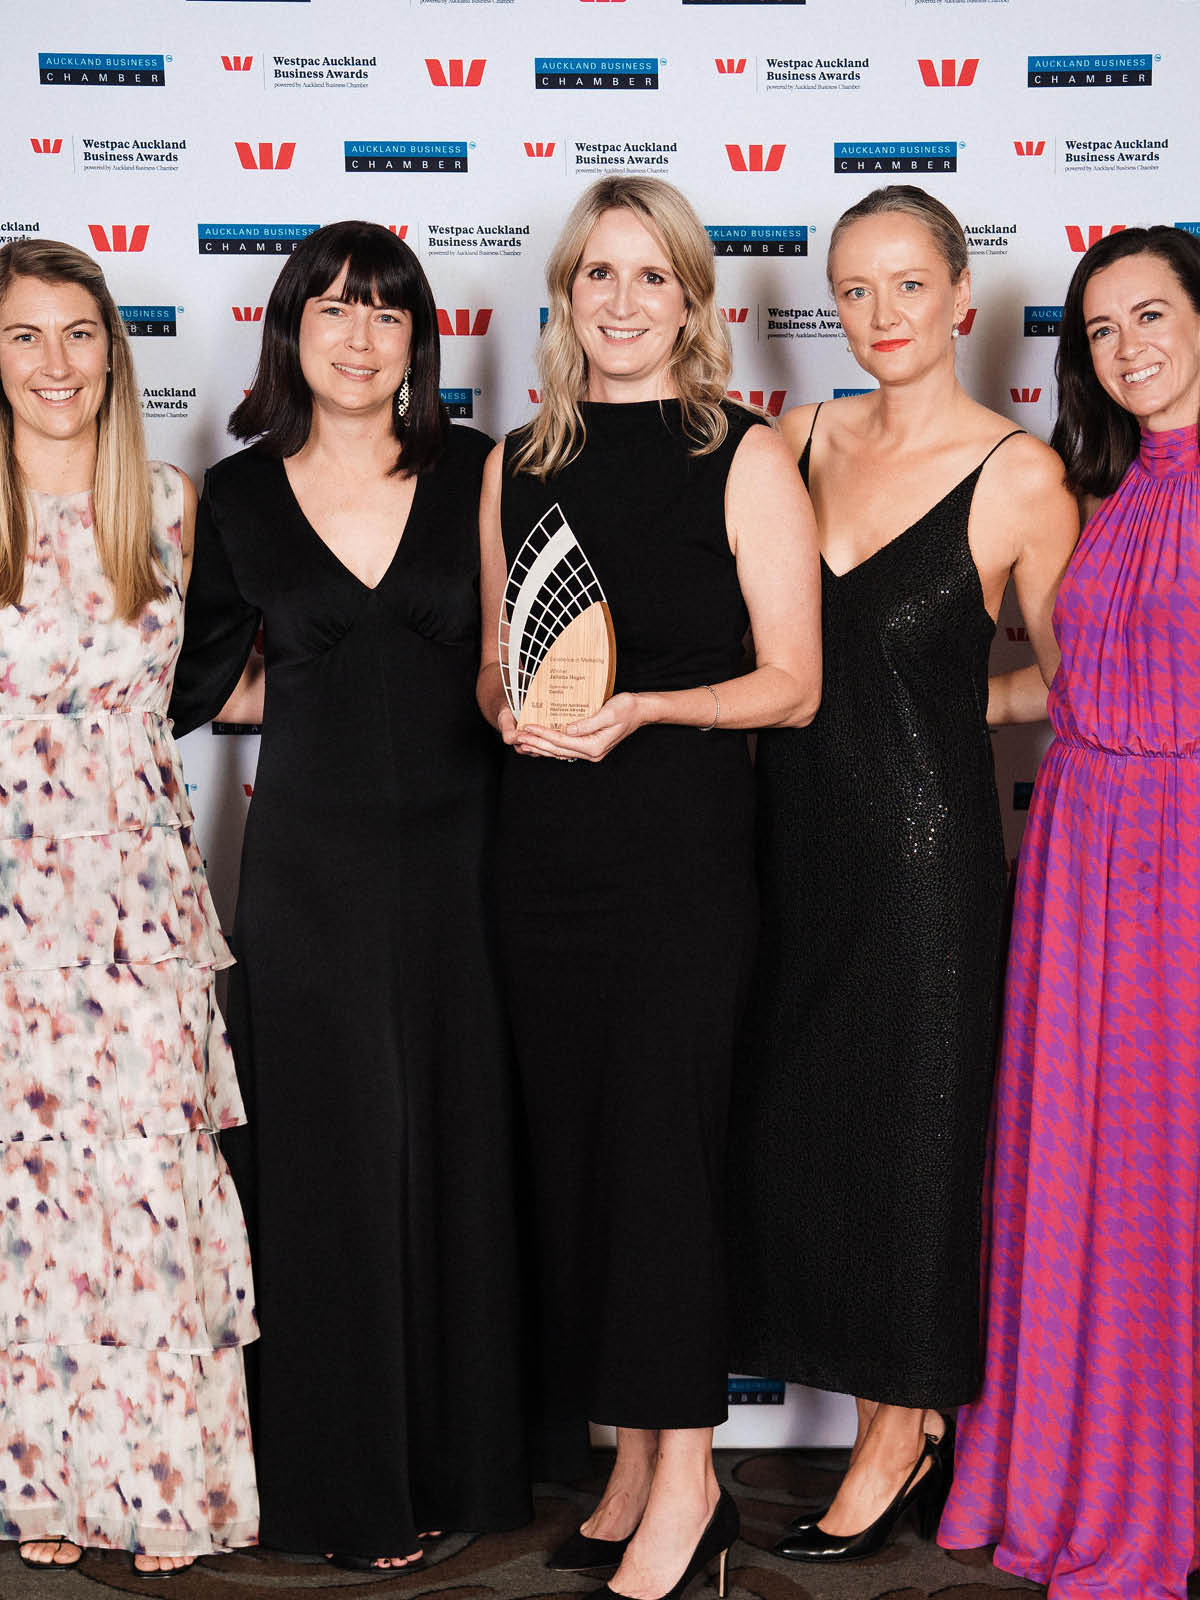 Best of the Best, Westpac Business Awards